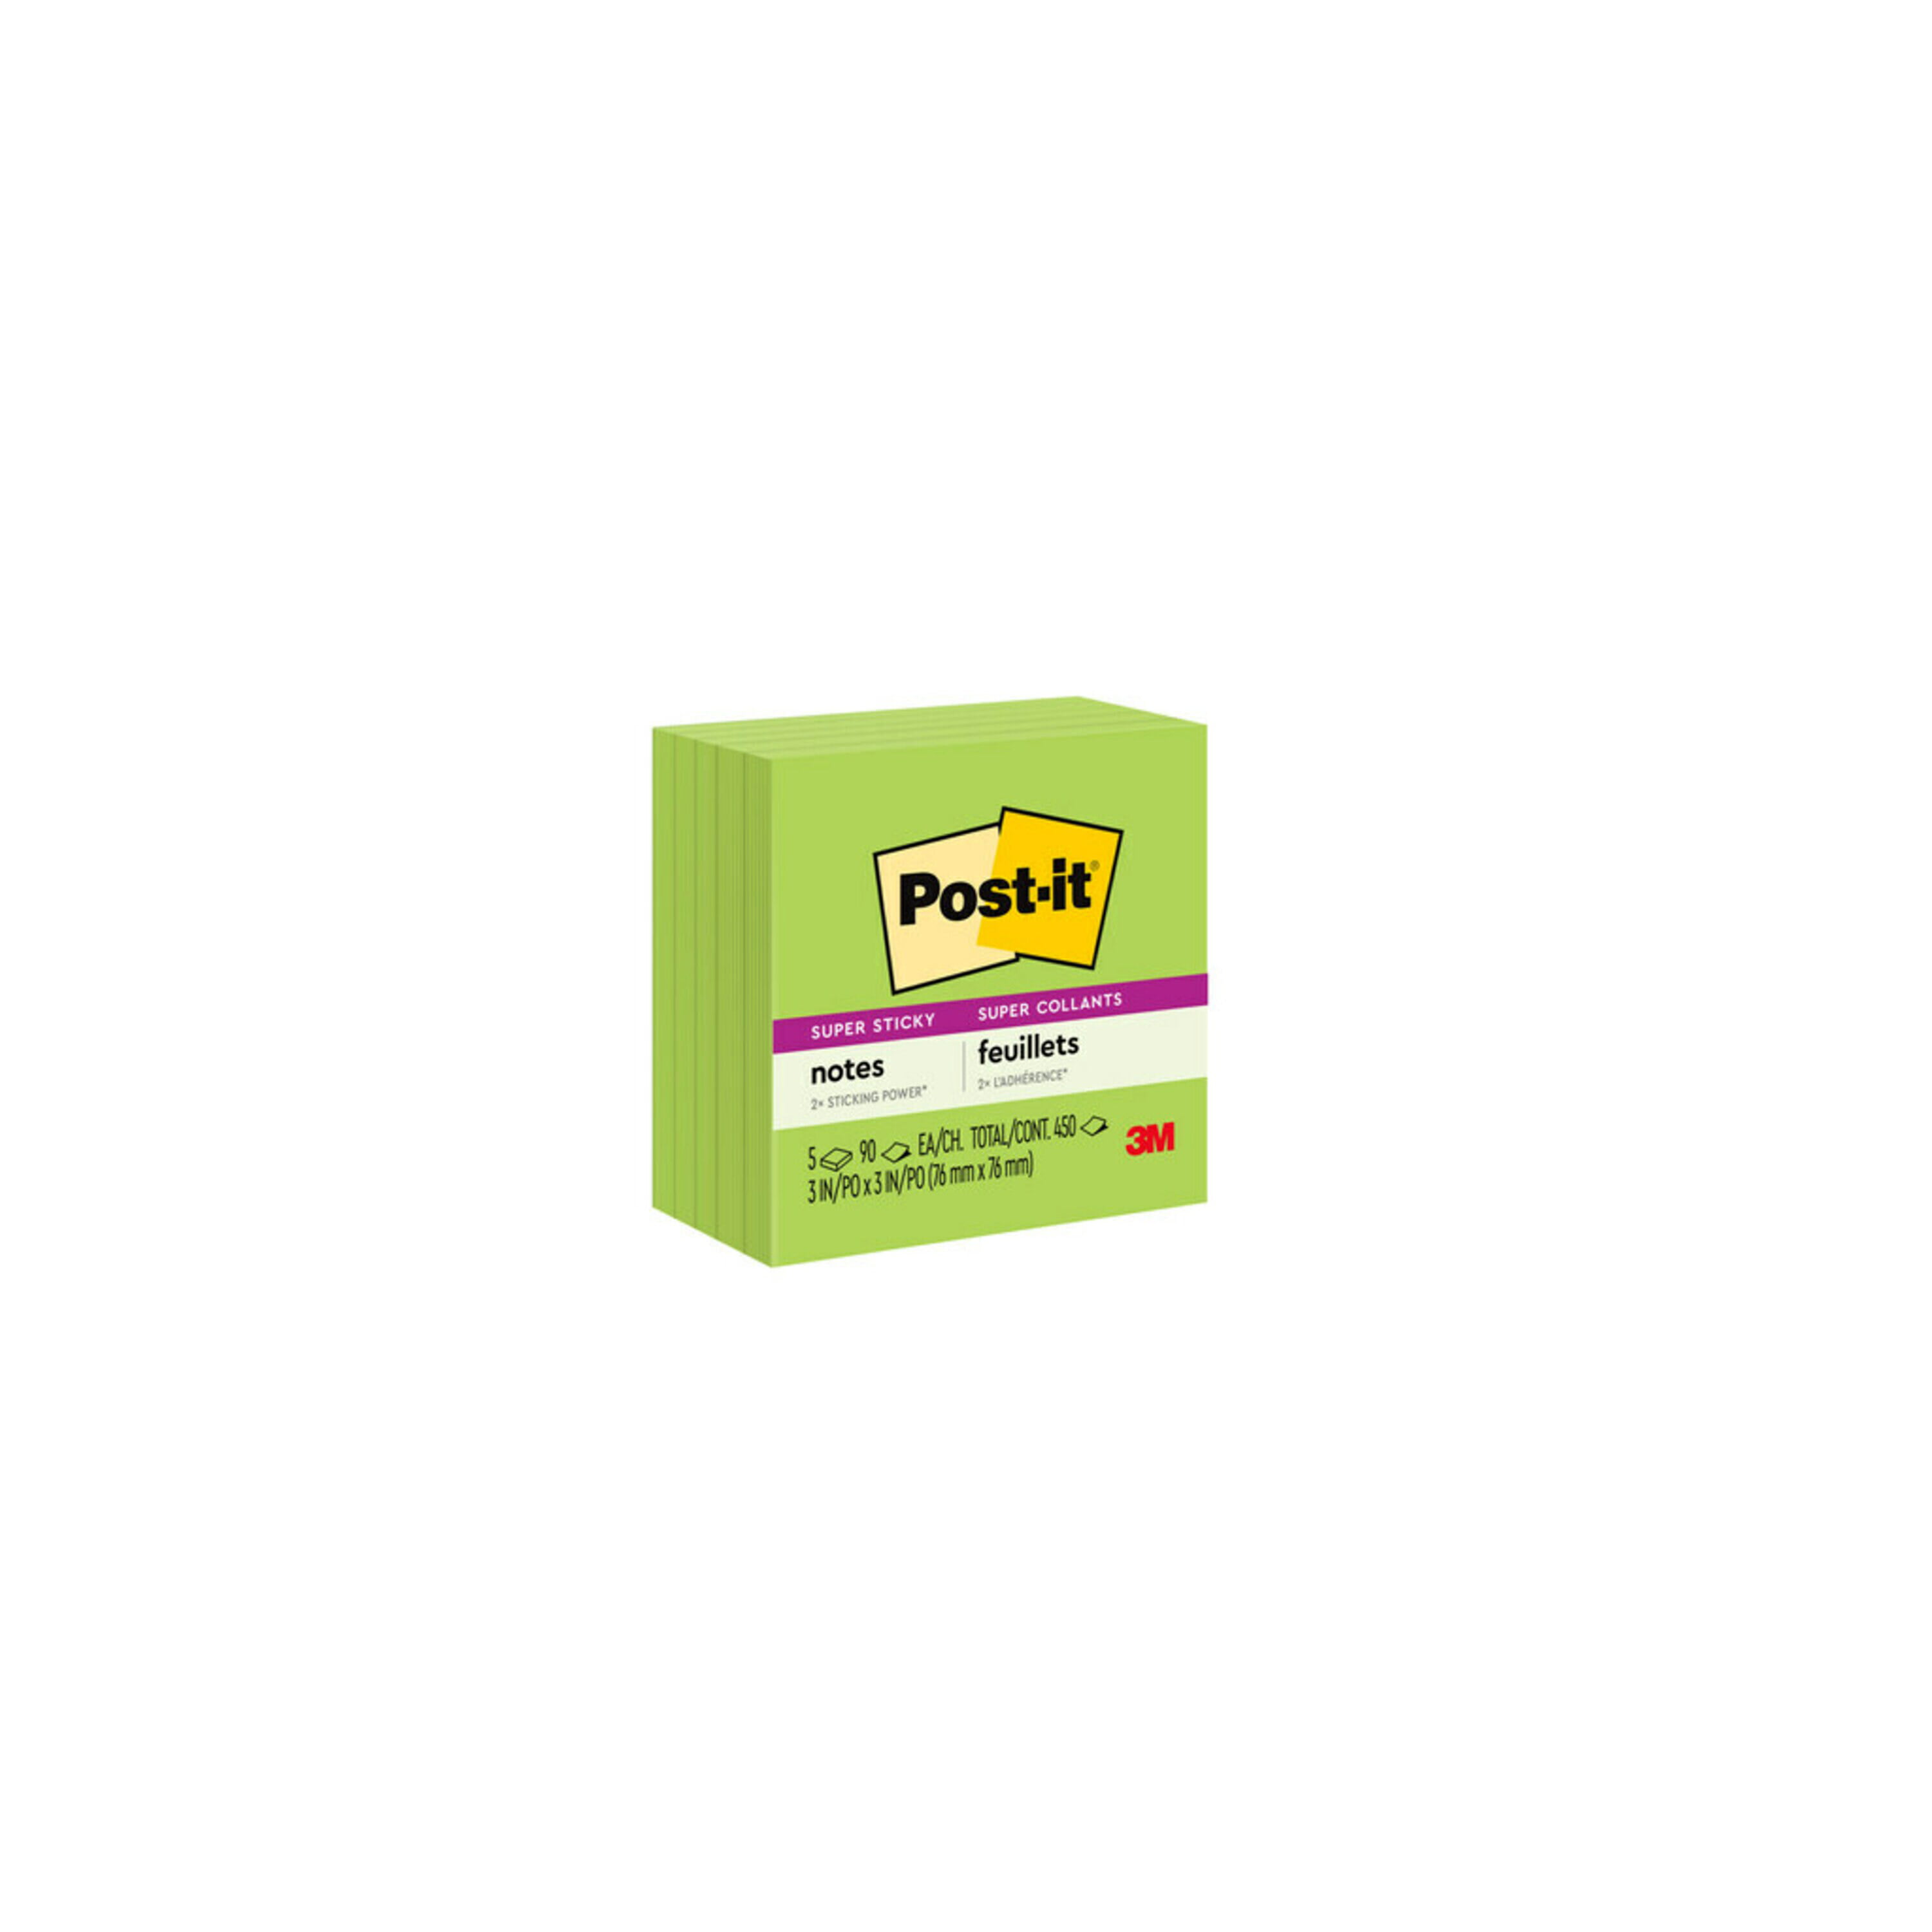 4 pads x 100 sheets Post-it Sticky Notes 3301-4AN 3" x 3" Total 400 sheets 